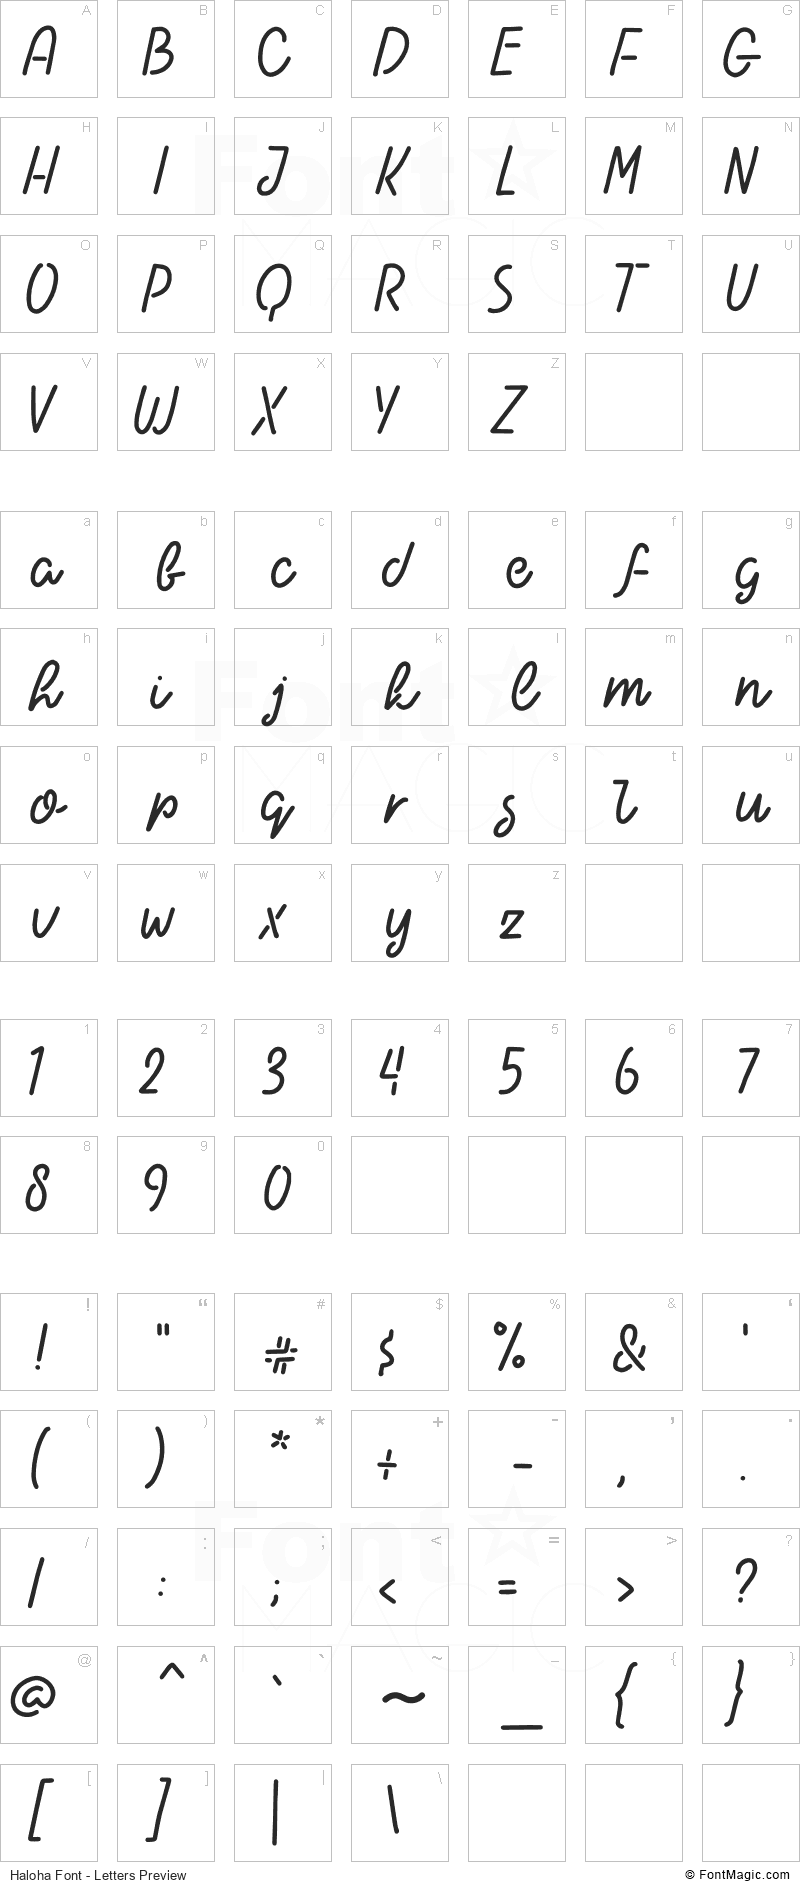 Haloha Font - All Latters Preview Chart